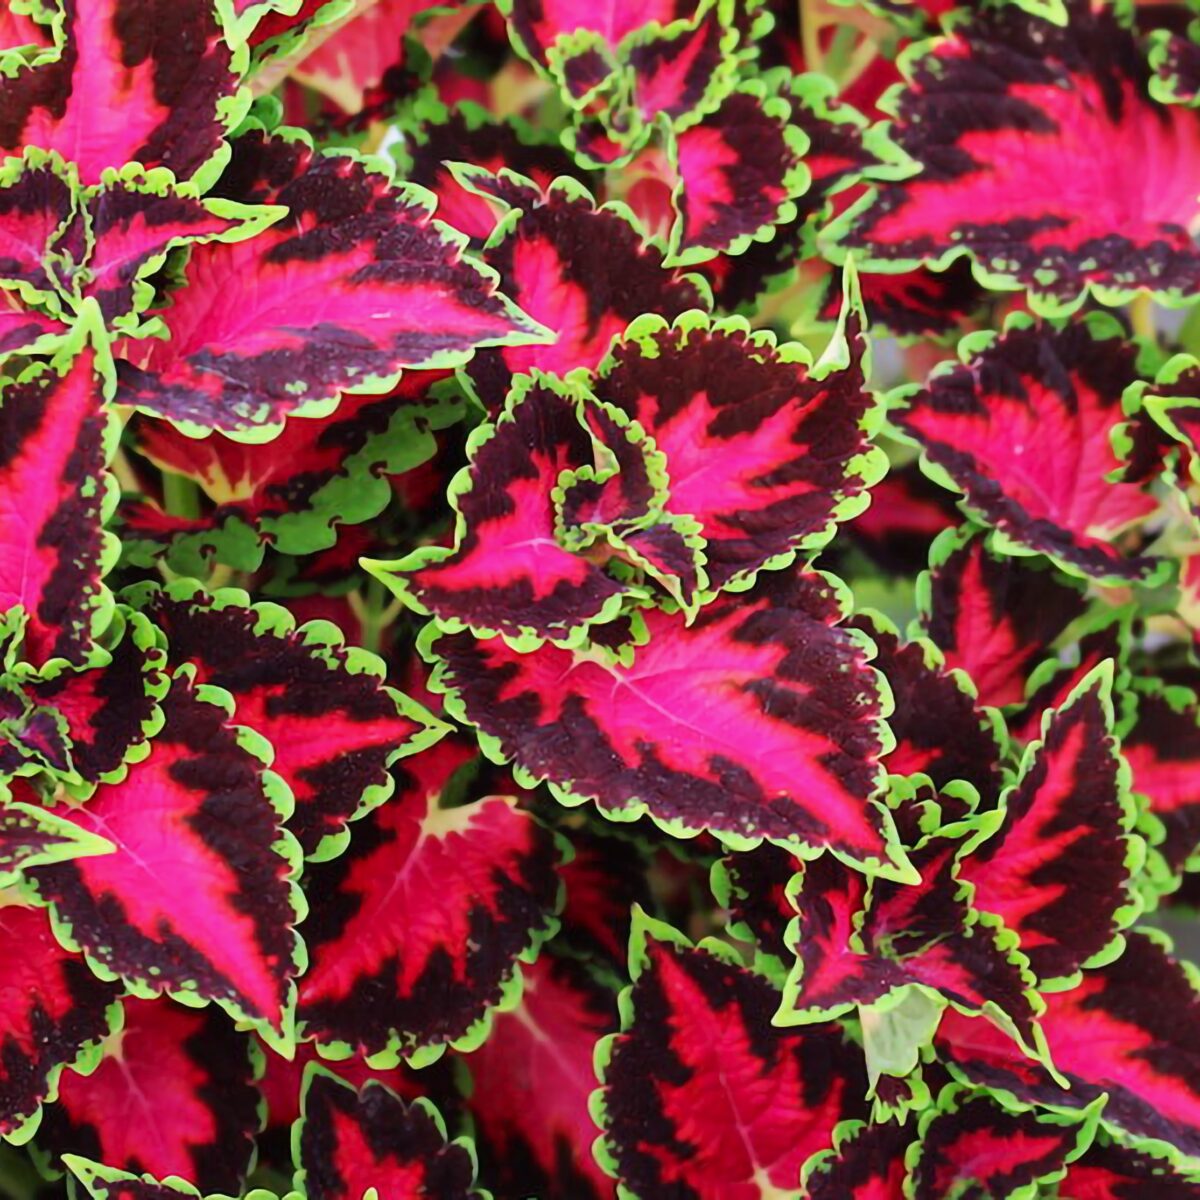 Adding Heartbreak Coleus to a mixed container for dynamic color contrasting plant